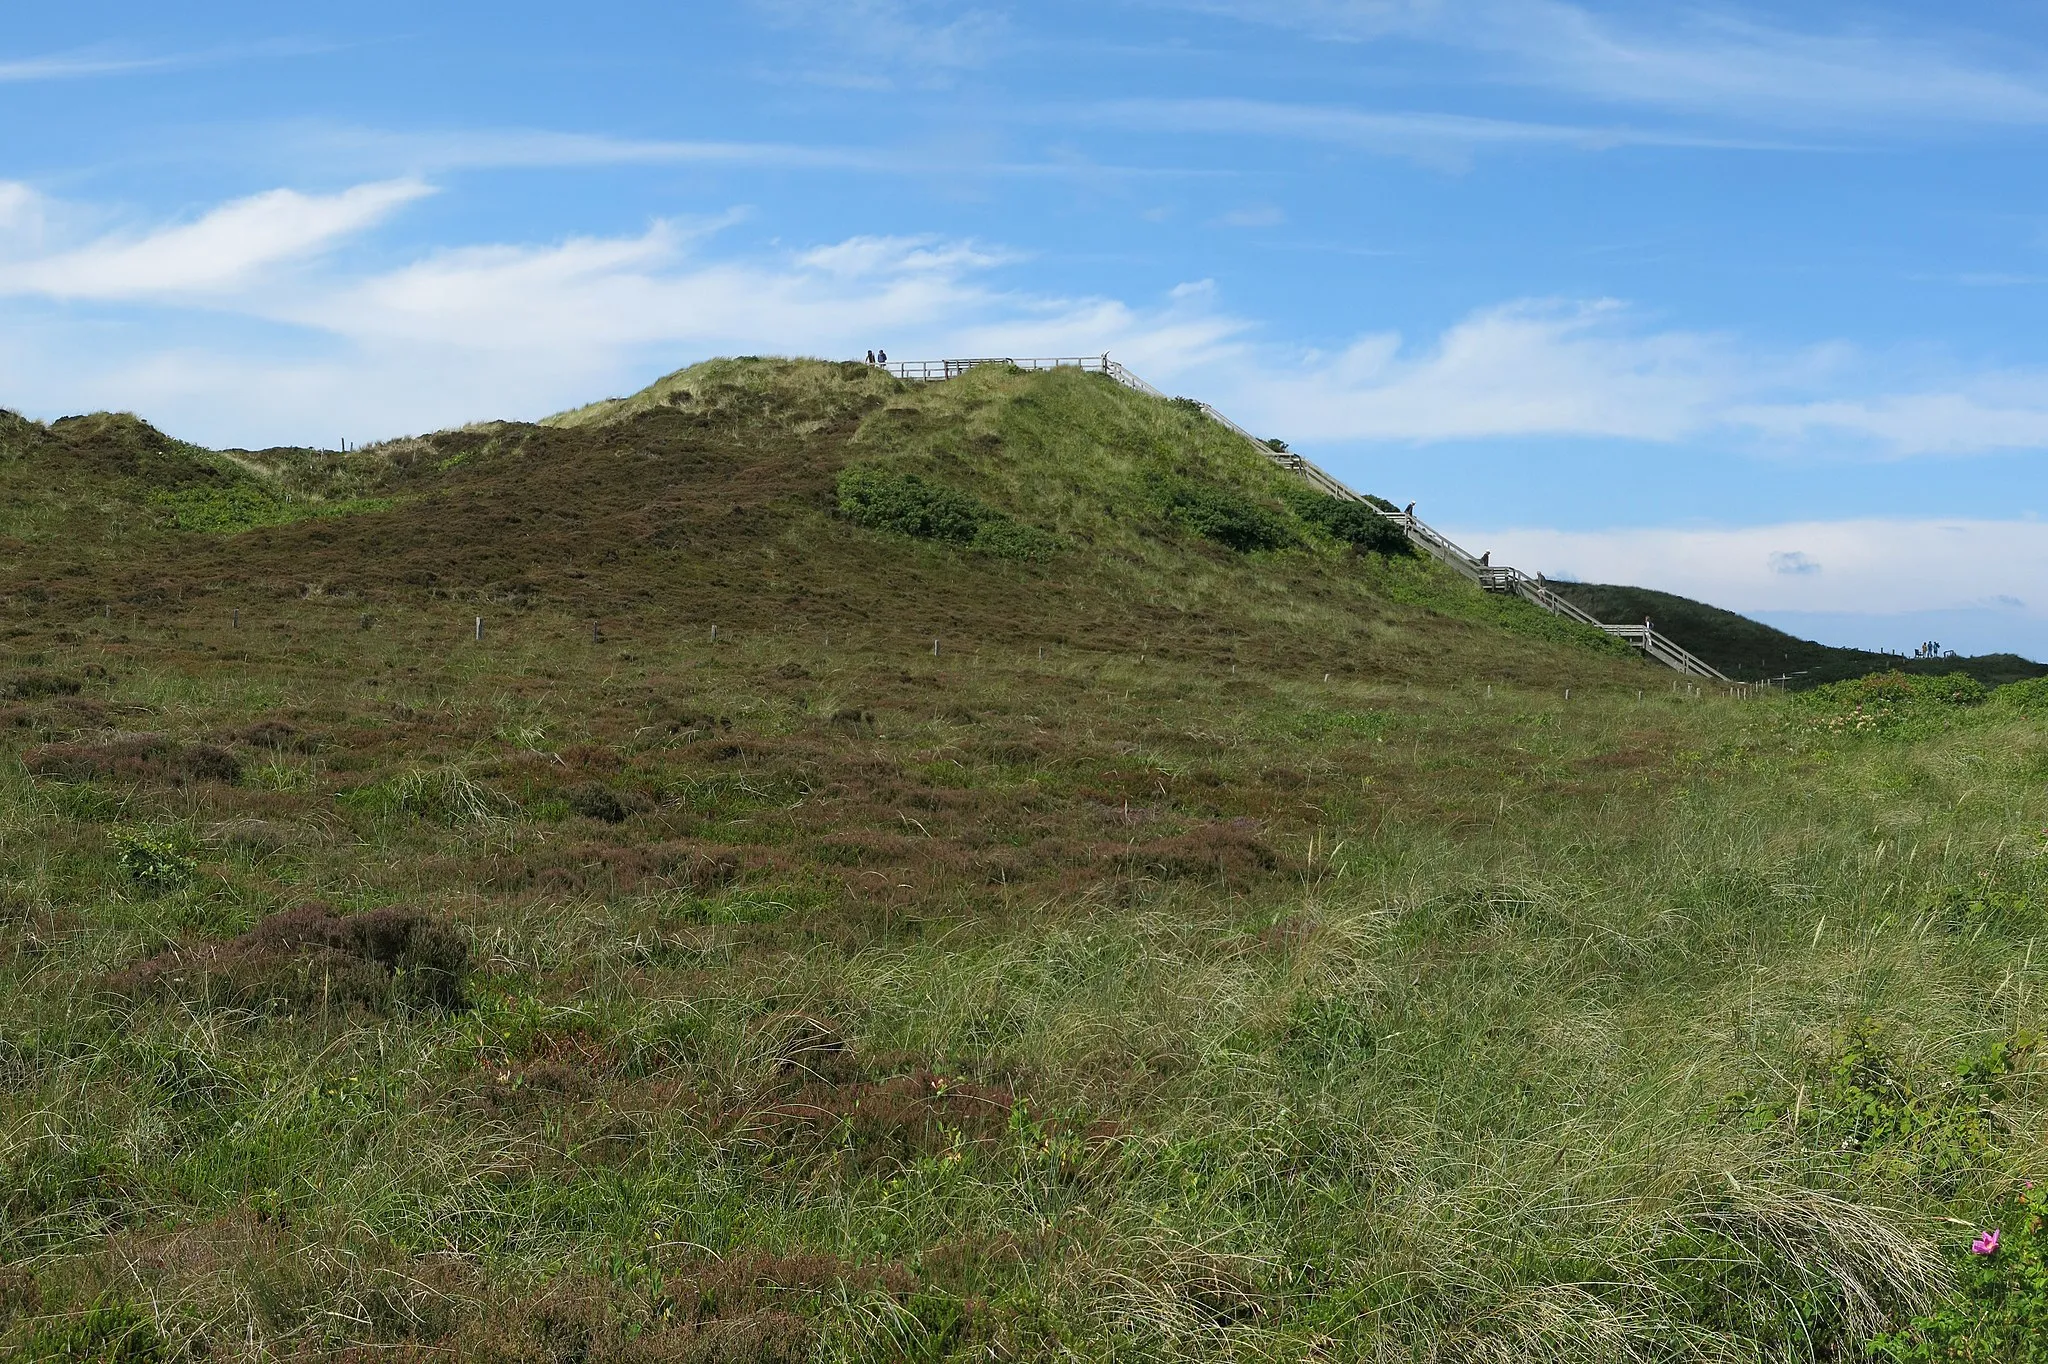 Photo showing: The Uwe-Dune, highest elevation of the island of Sylt, seen from east.